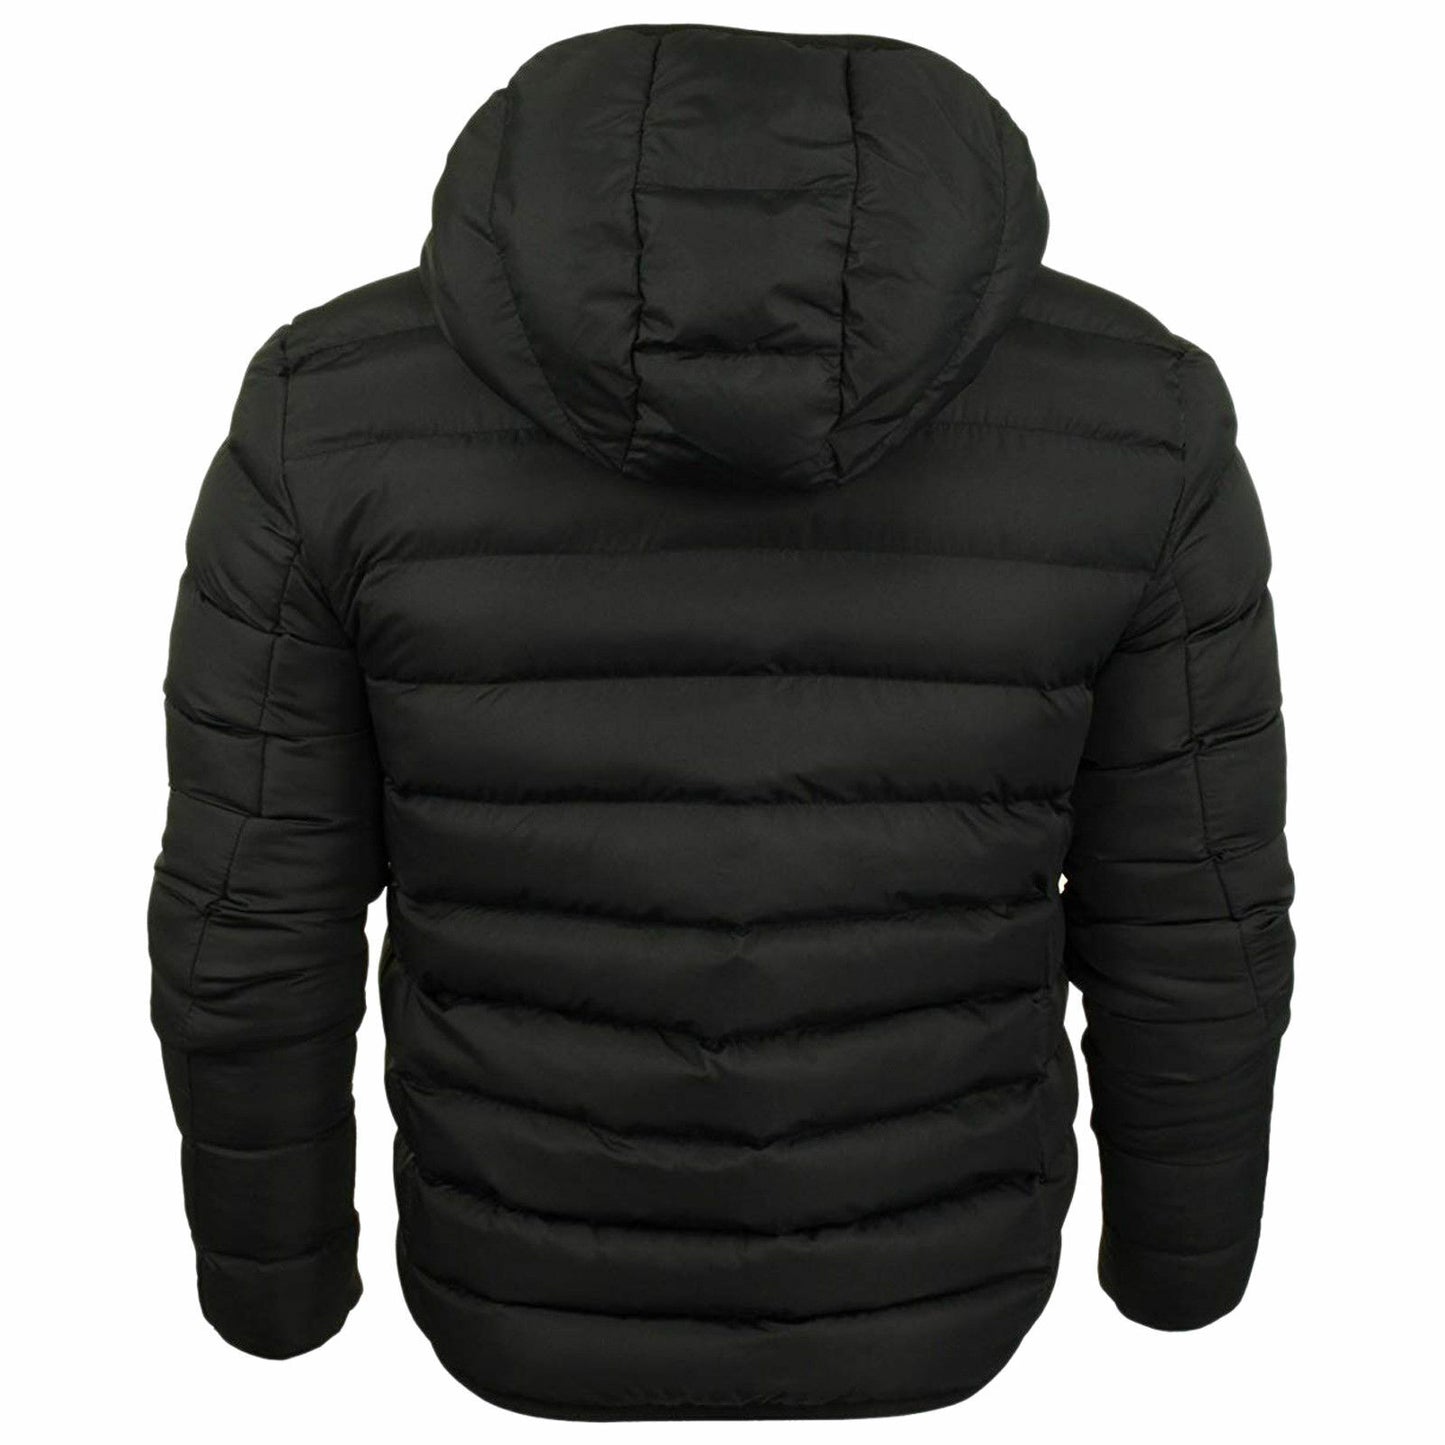 BRAVE SOUL BOYS PADDED JACKET PUFFER PUFFA WARM WINTER QUILTED BUBBLE HOODED SCHOOL COAT